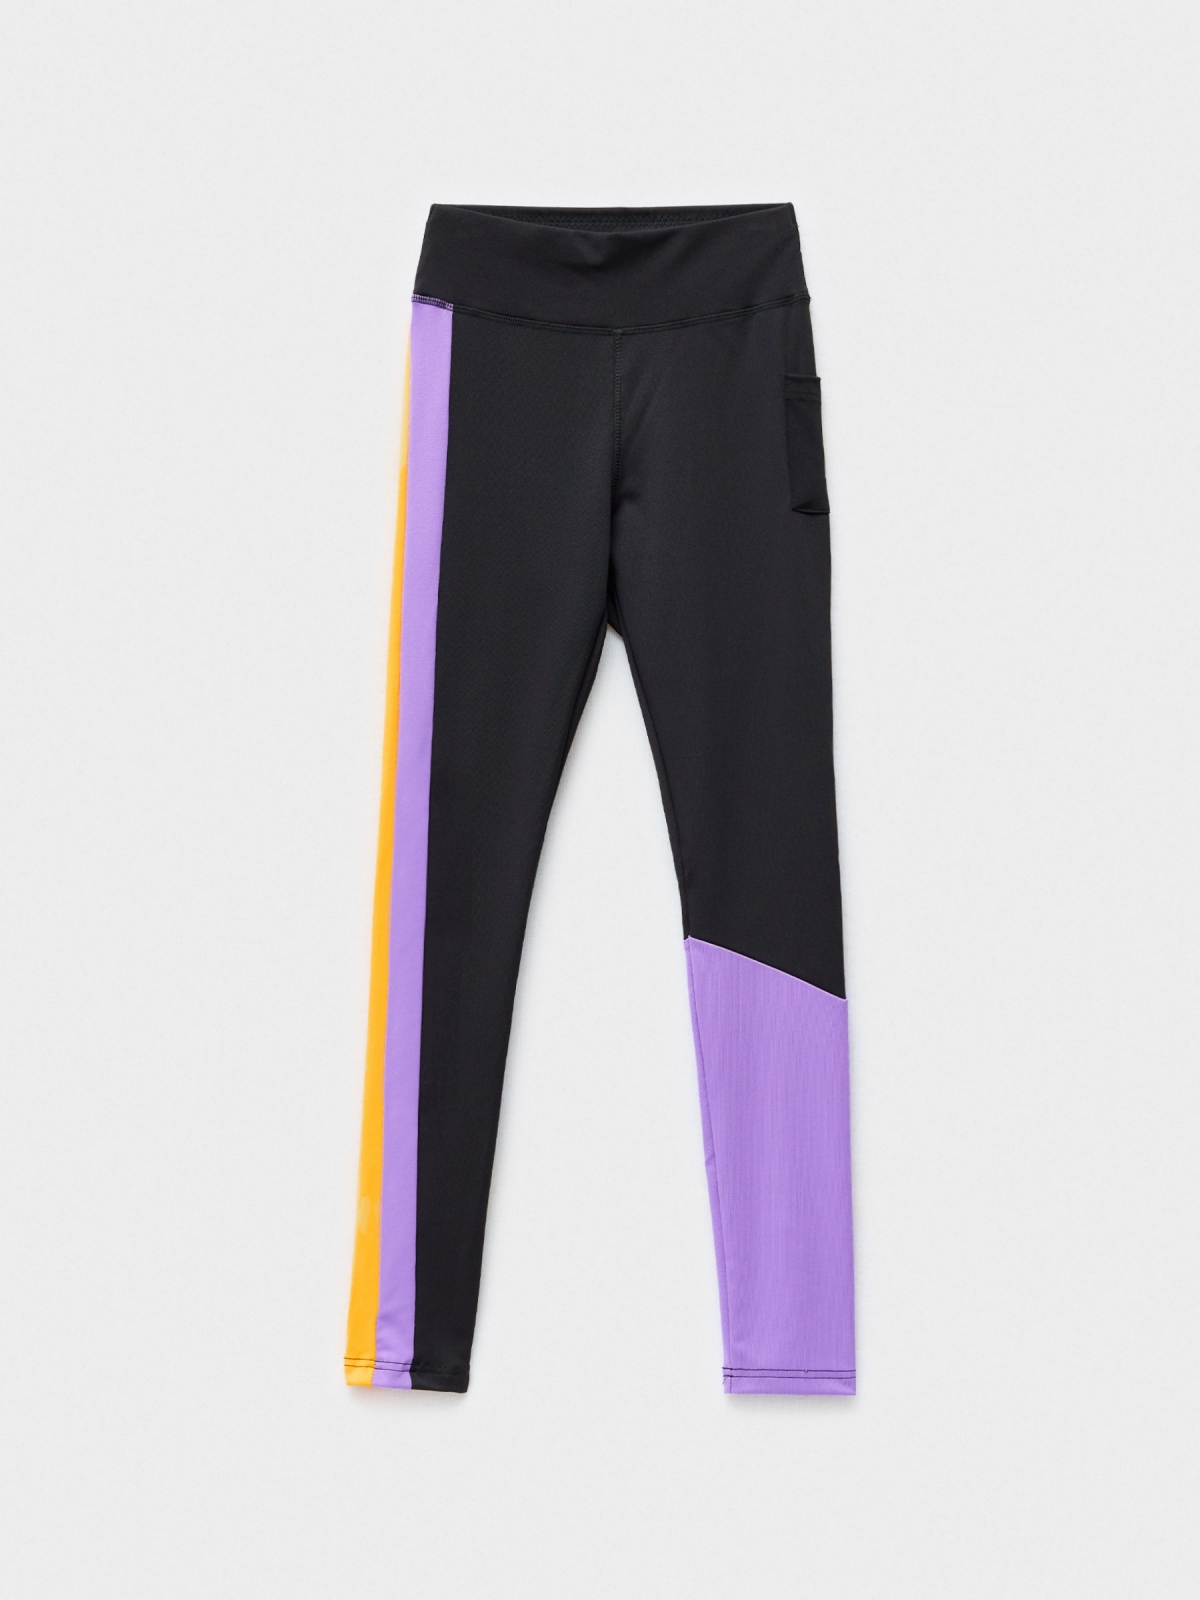  Leggings with colored details black